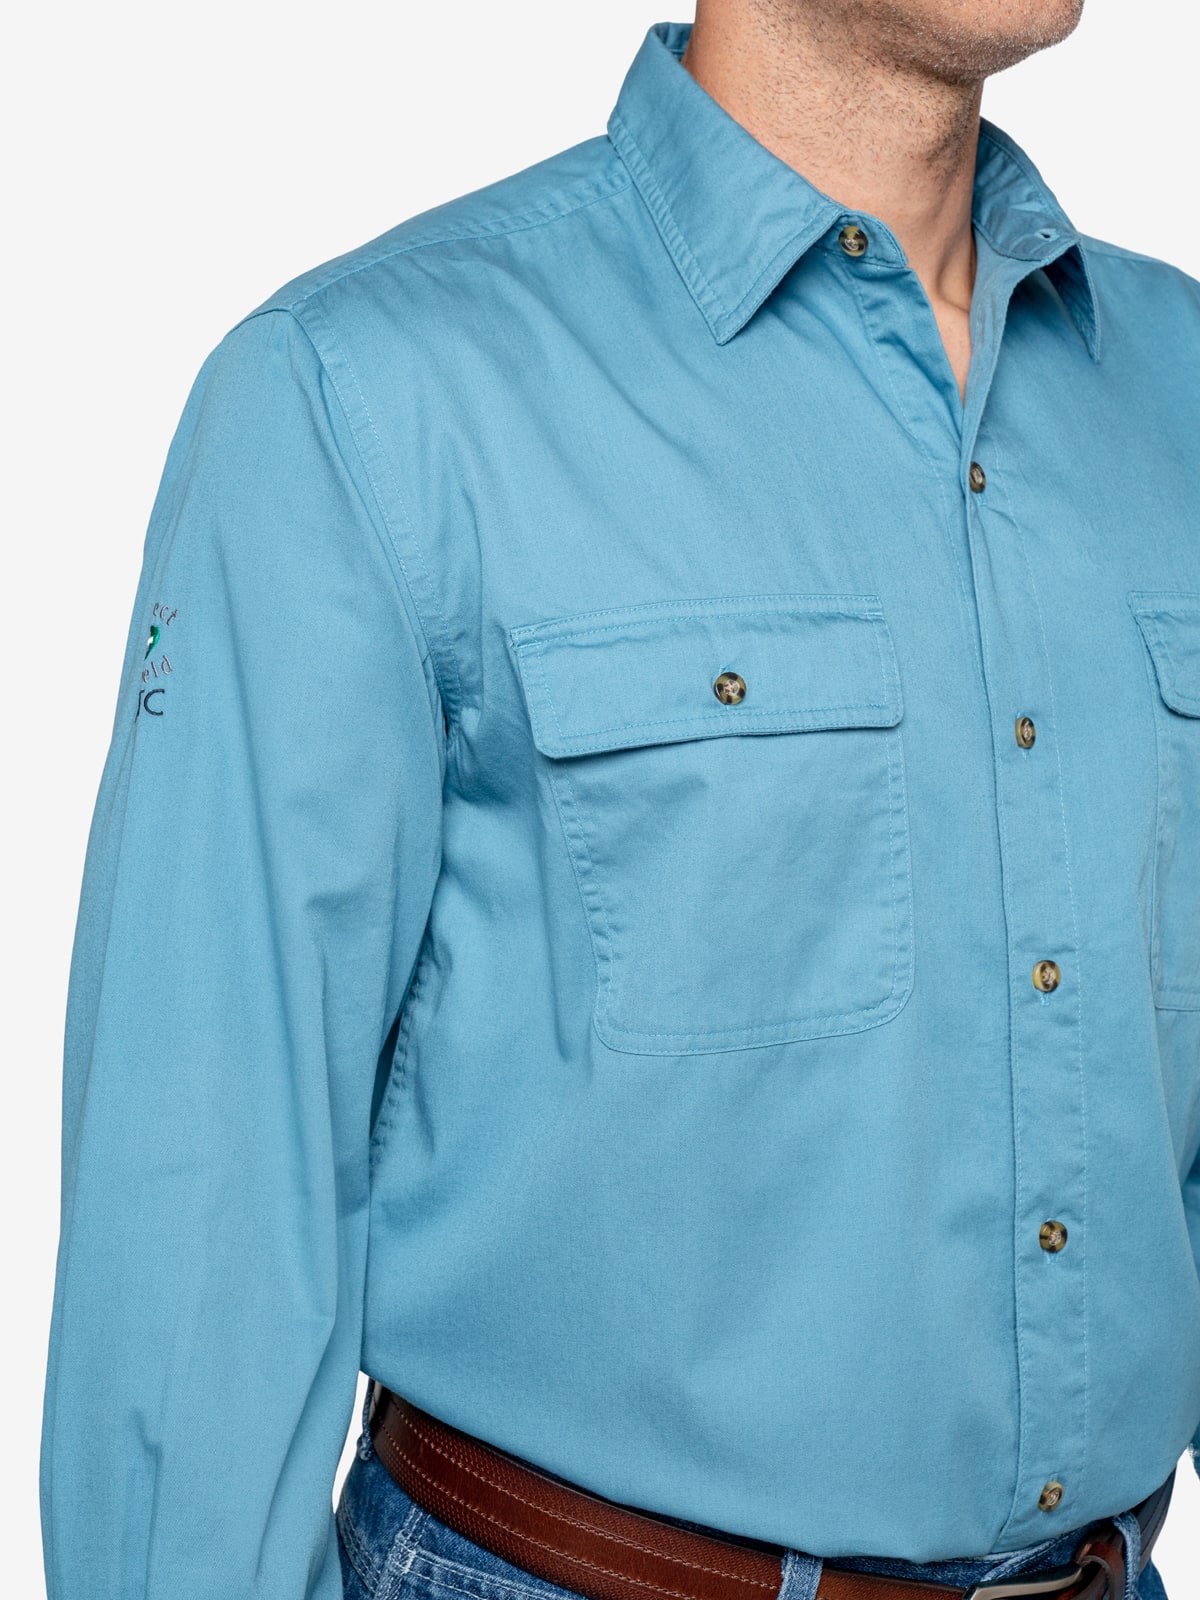 Insect Shield Men's Twill Work Shirt